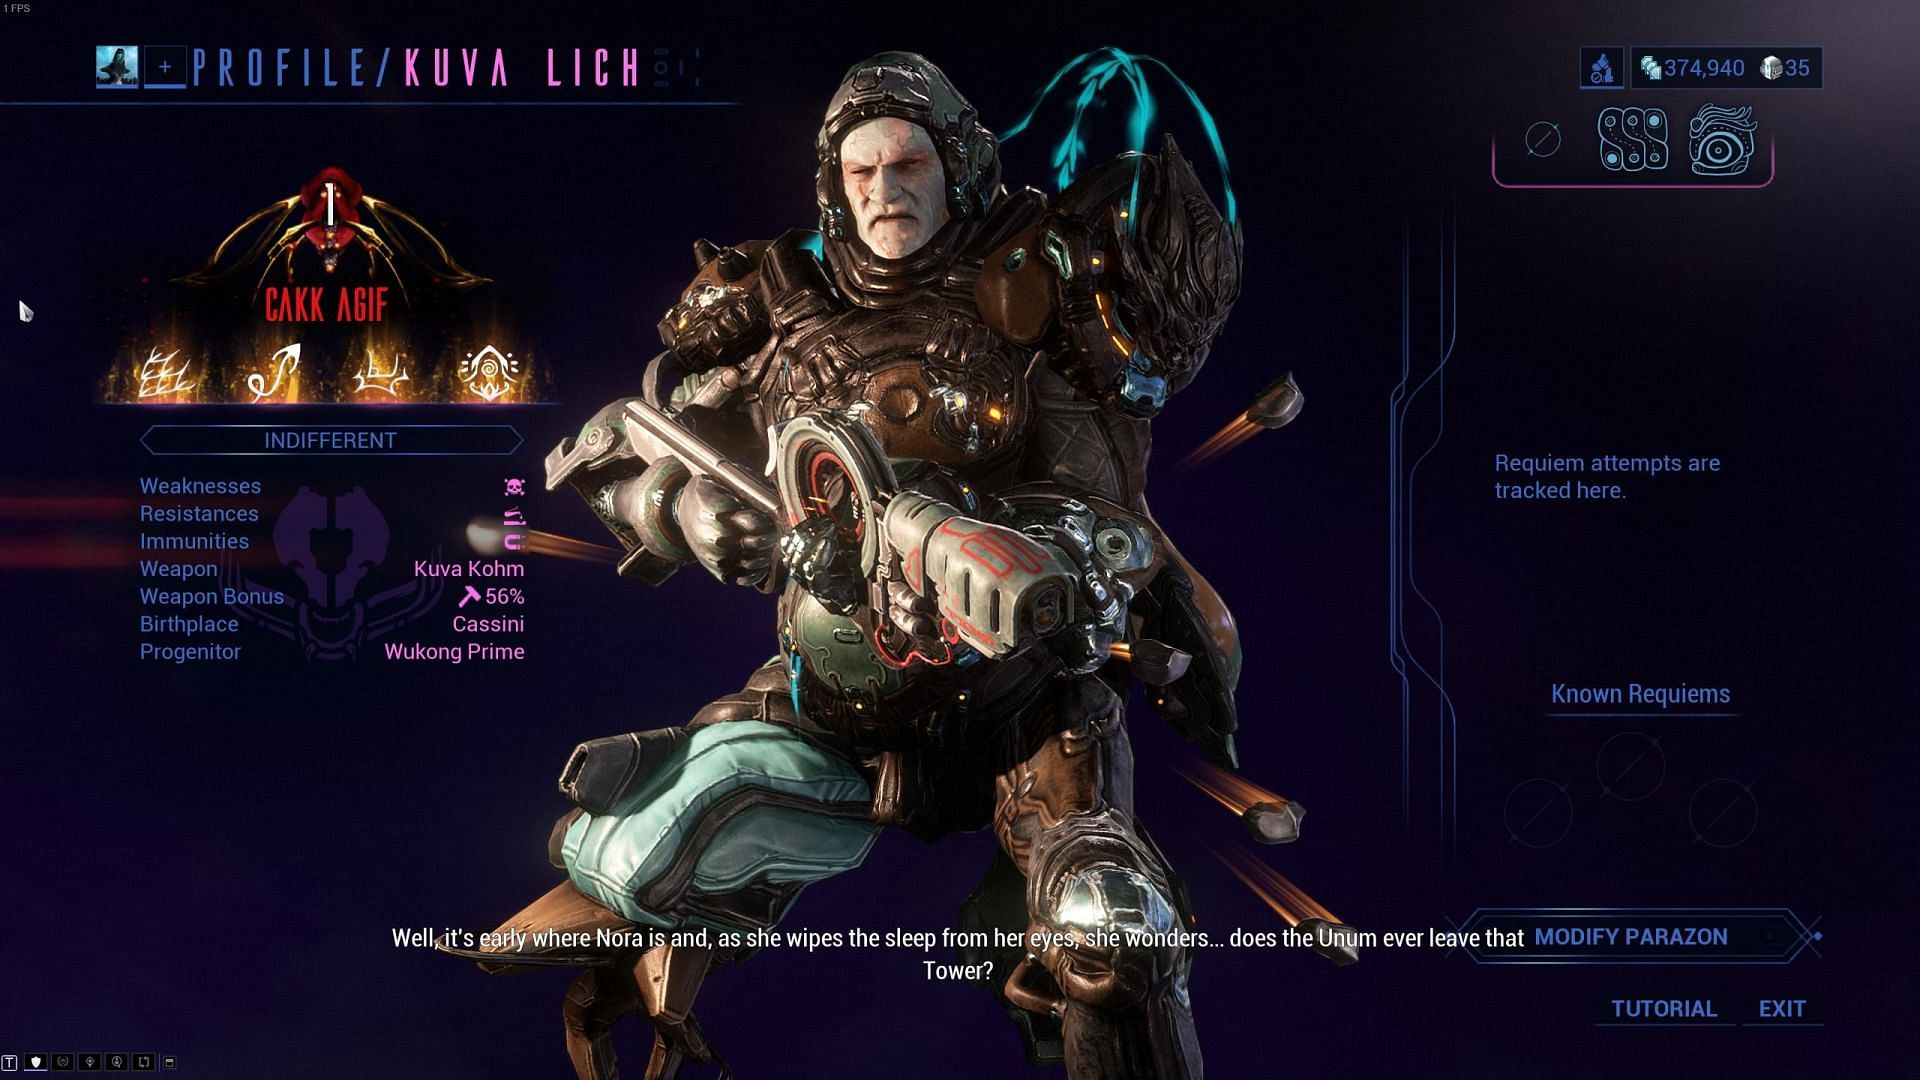 Kuva Kohm is the best bullet-hose Kuva weapon - once you get to full spool, that is (Image via Digital Extremes)